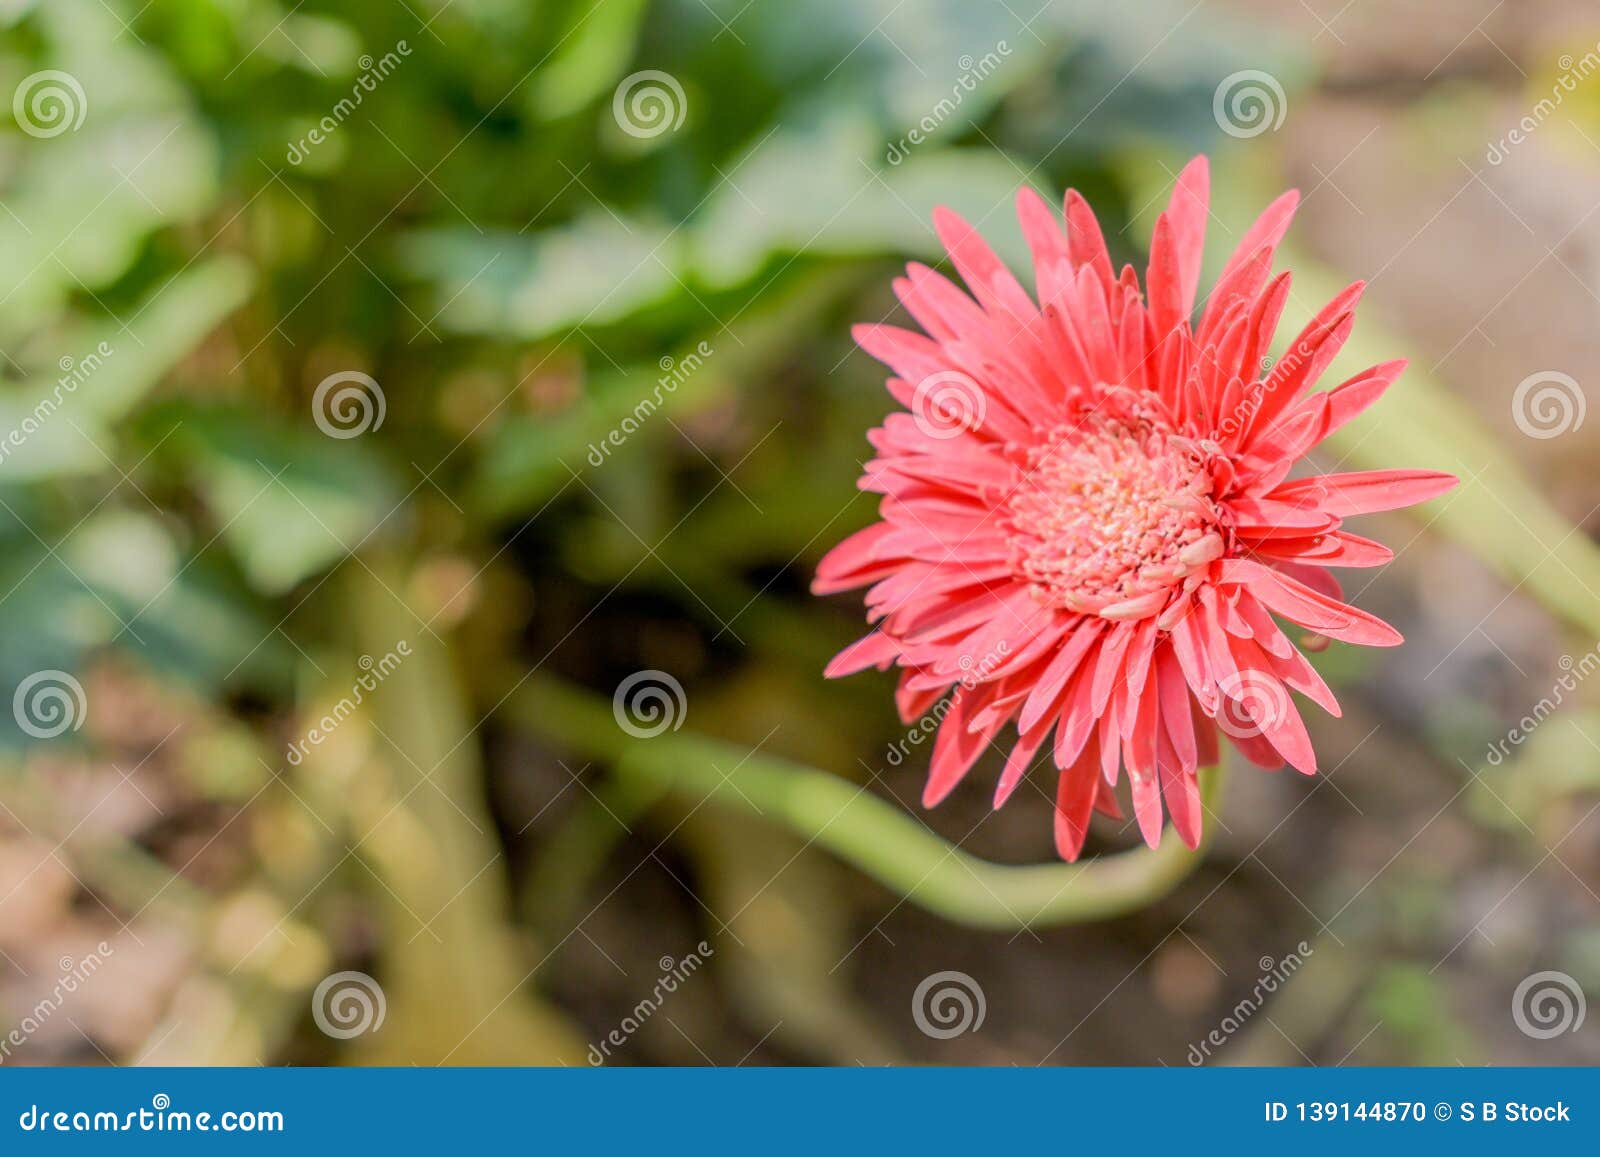 A Barberton Daisy Gerbera In Sunlight Known As Transvaal Daisy Or Barbertonse Madeliefie Gerbera Jamesonii Is A Species Of Stock Photo Image Of Clustered Botanical 139144870